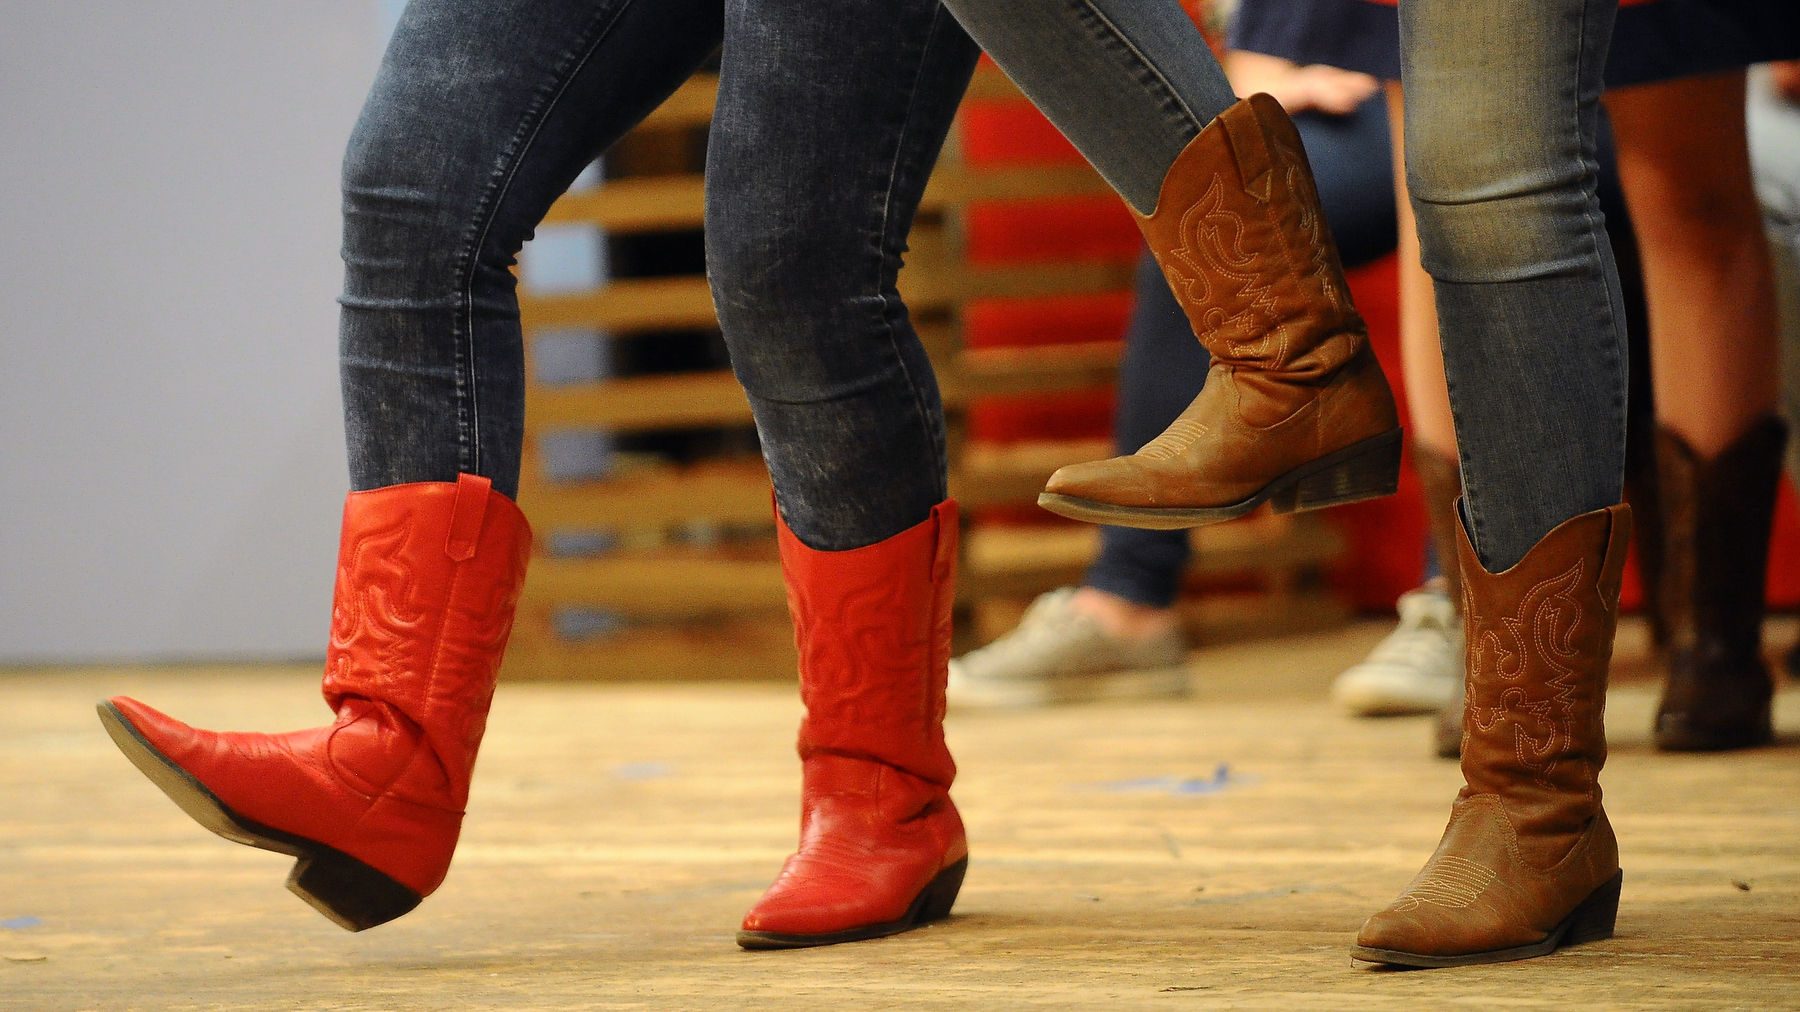 red cowgirl boots footloose